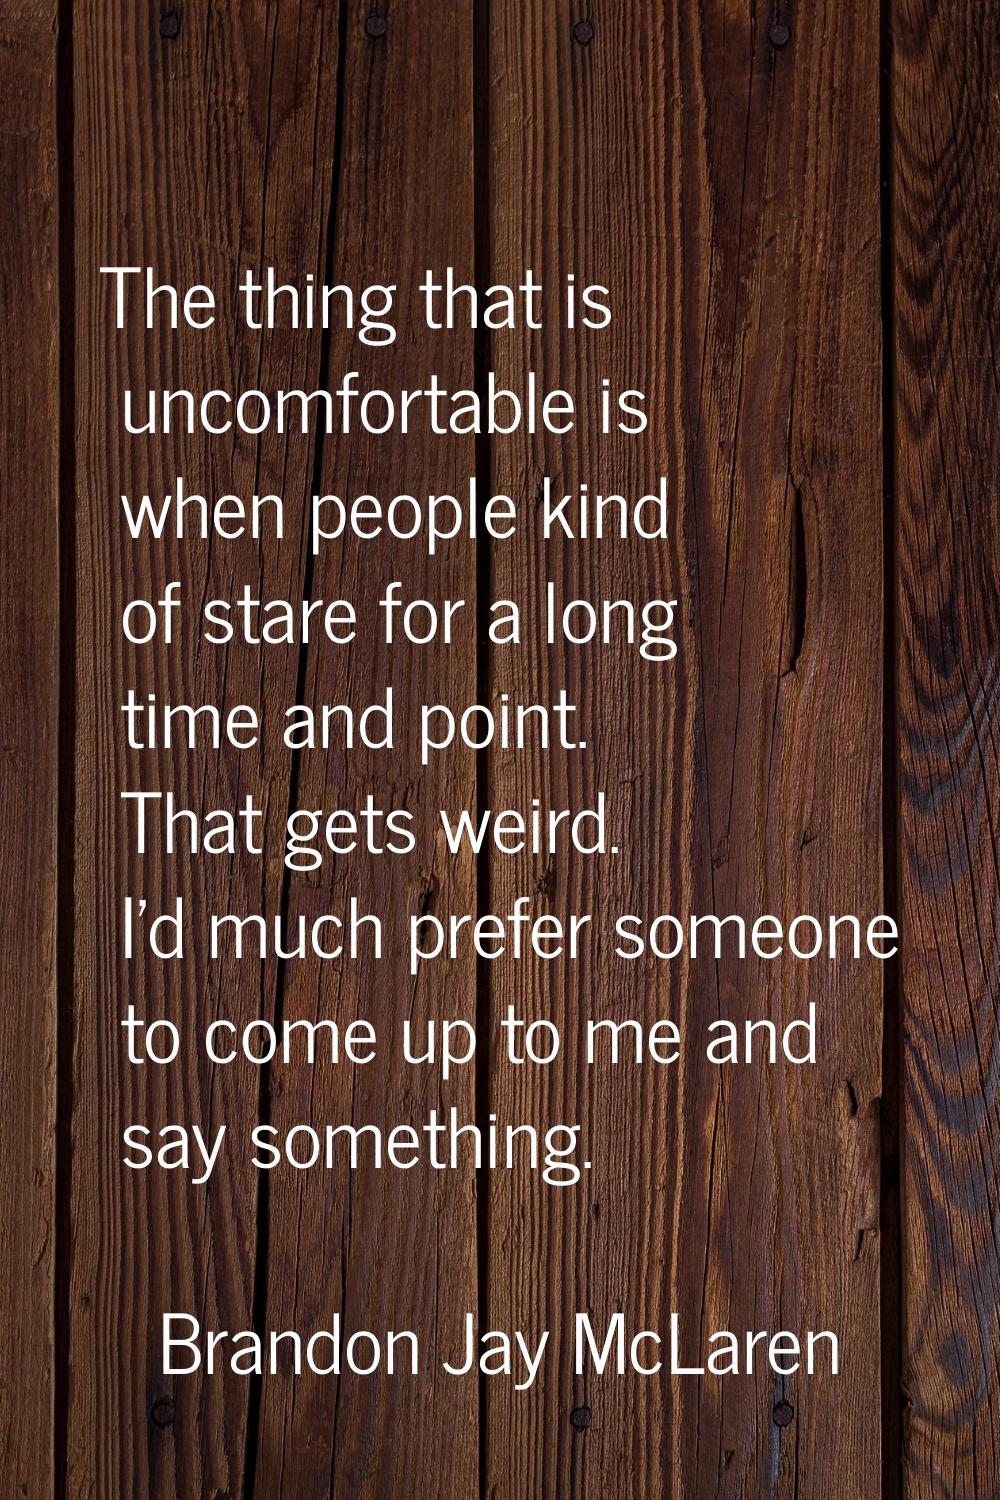 The thing that is uncomfortable is when people kind of stare for a long time and point. That gets w